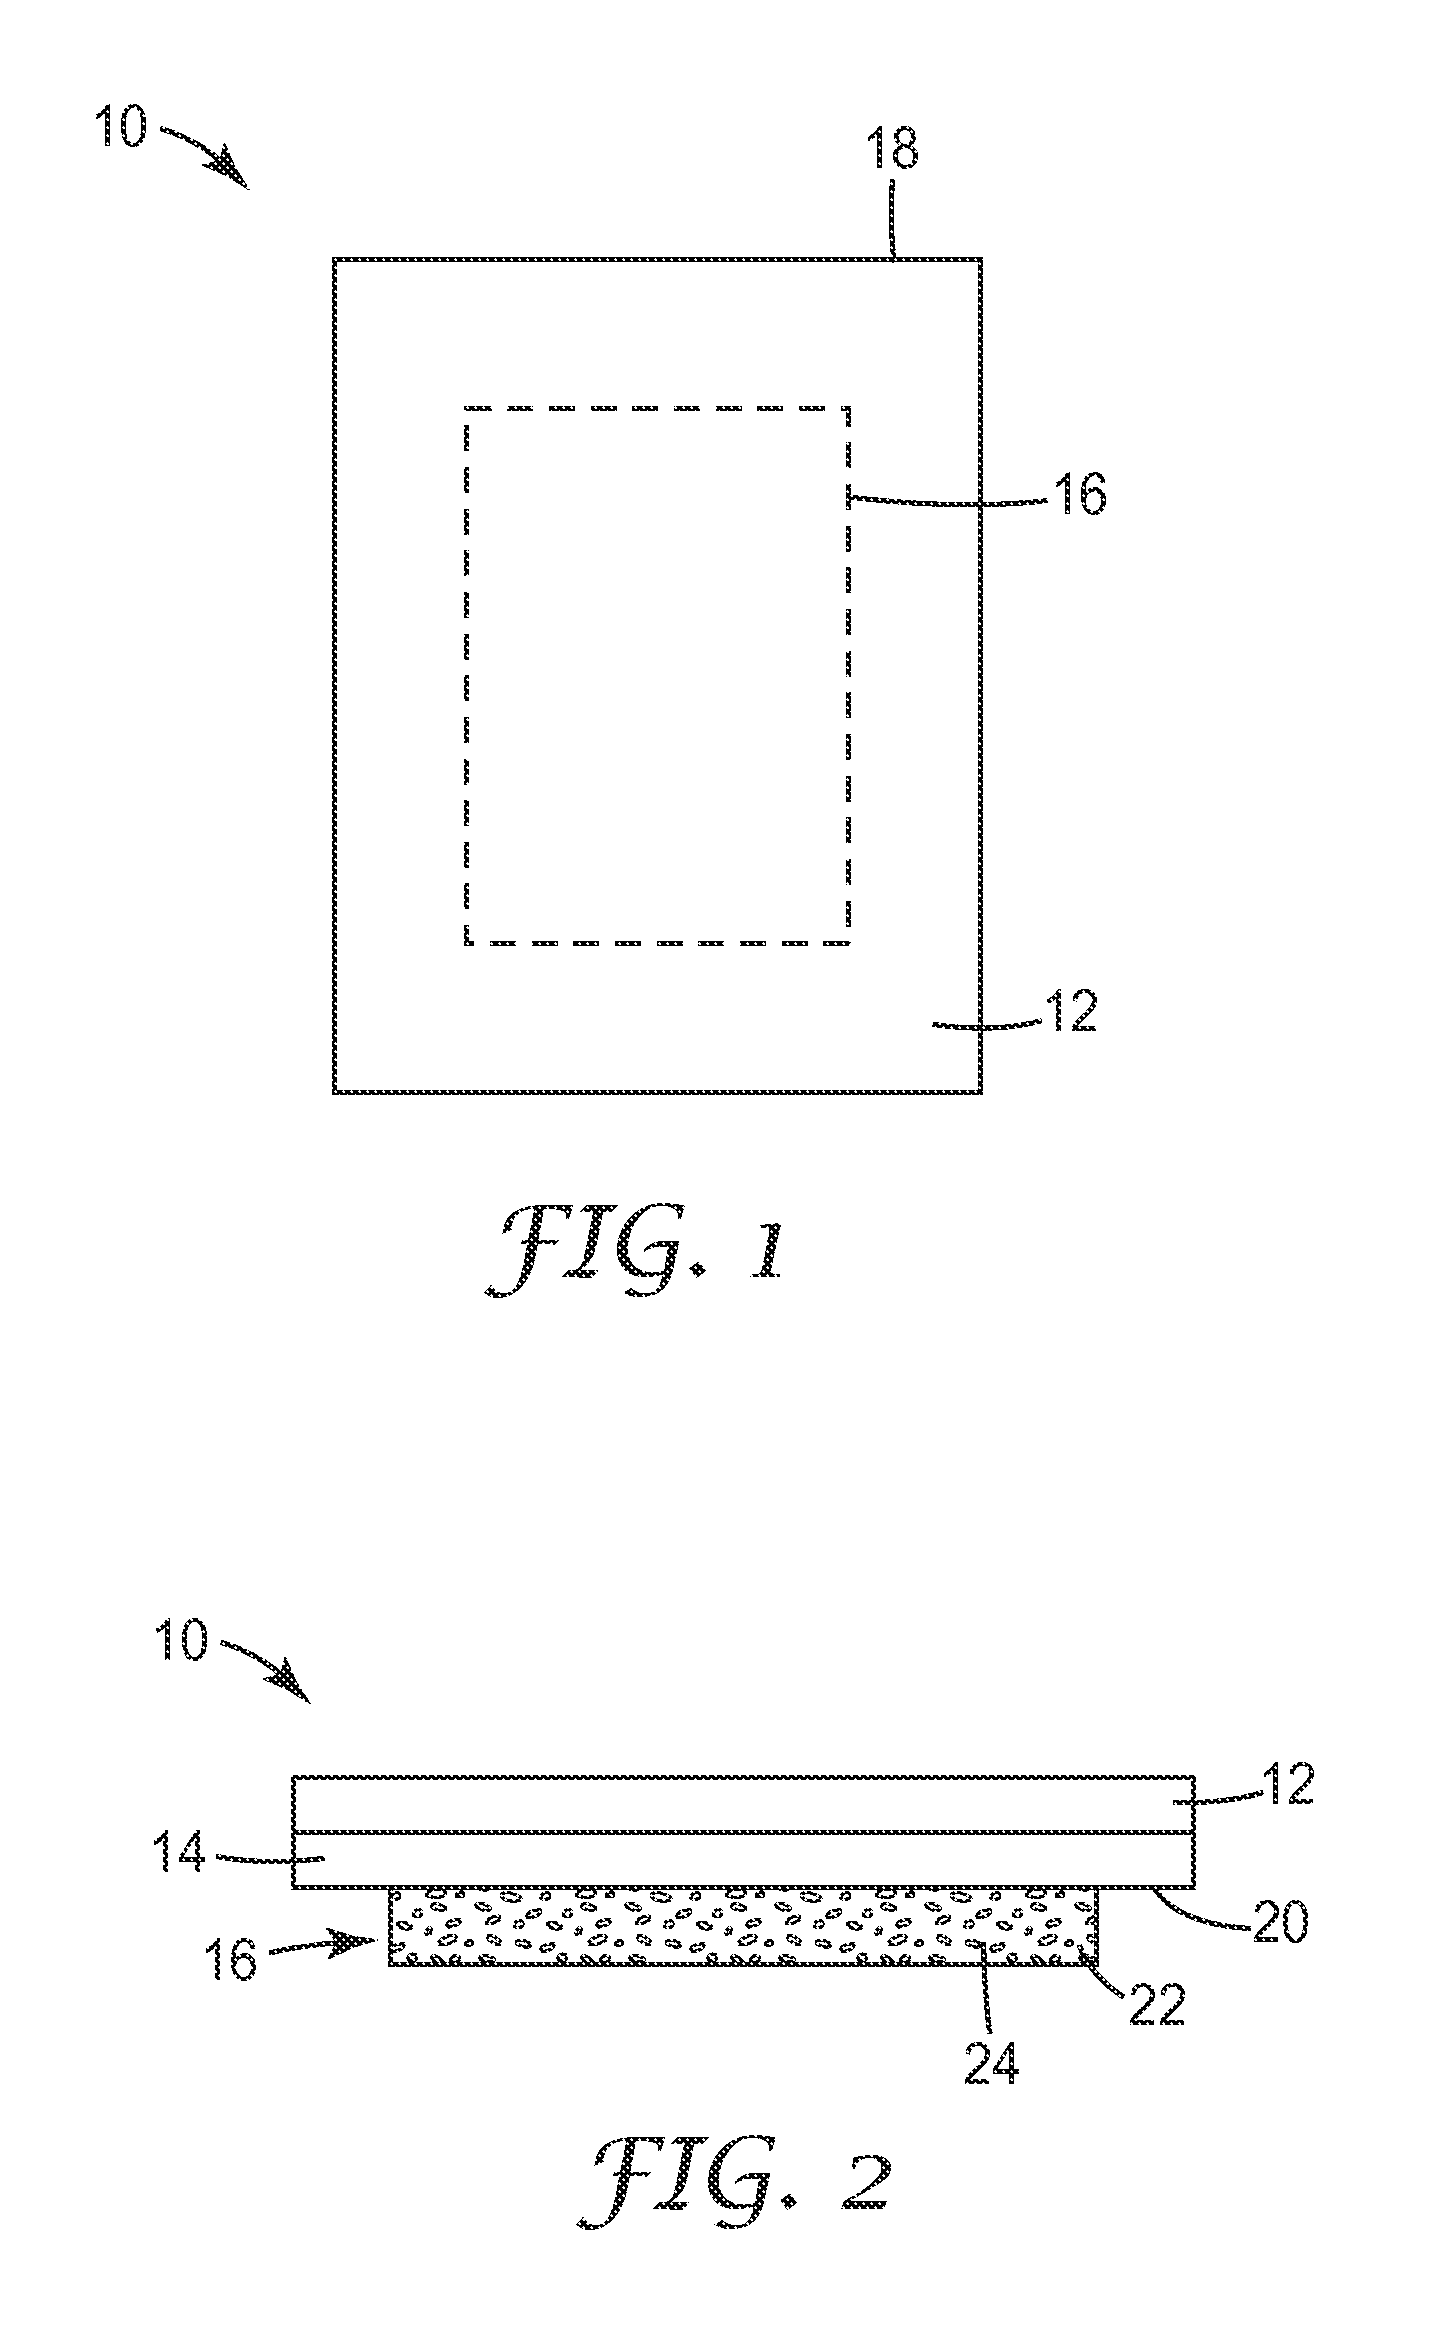 Medical articles and methods of making using miscible composition